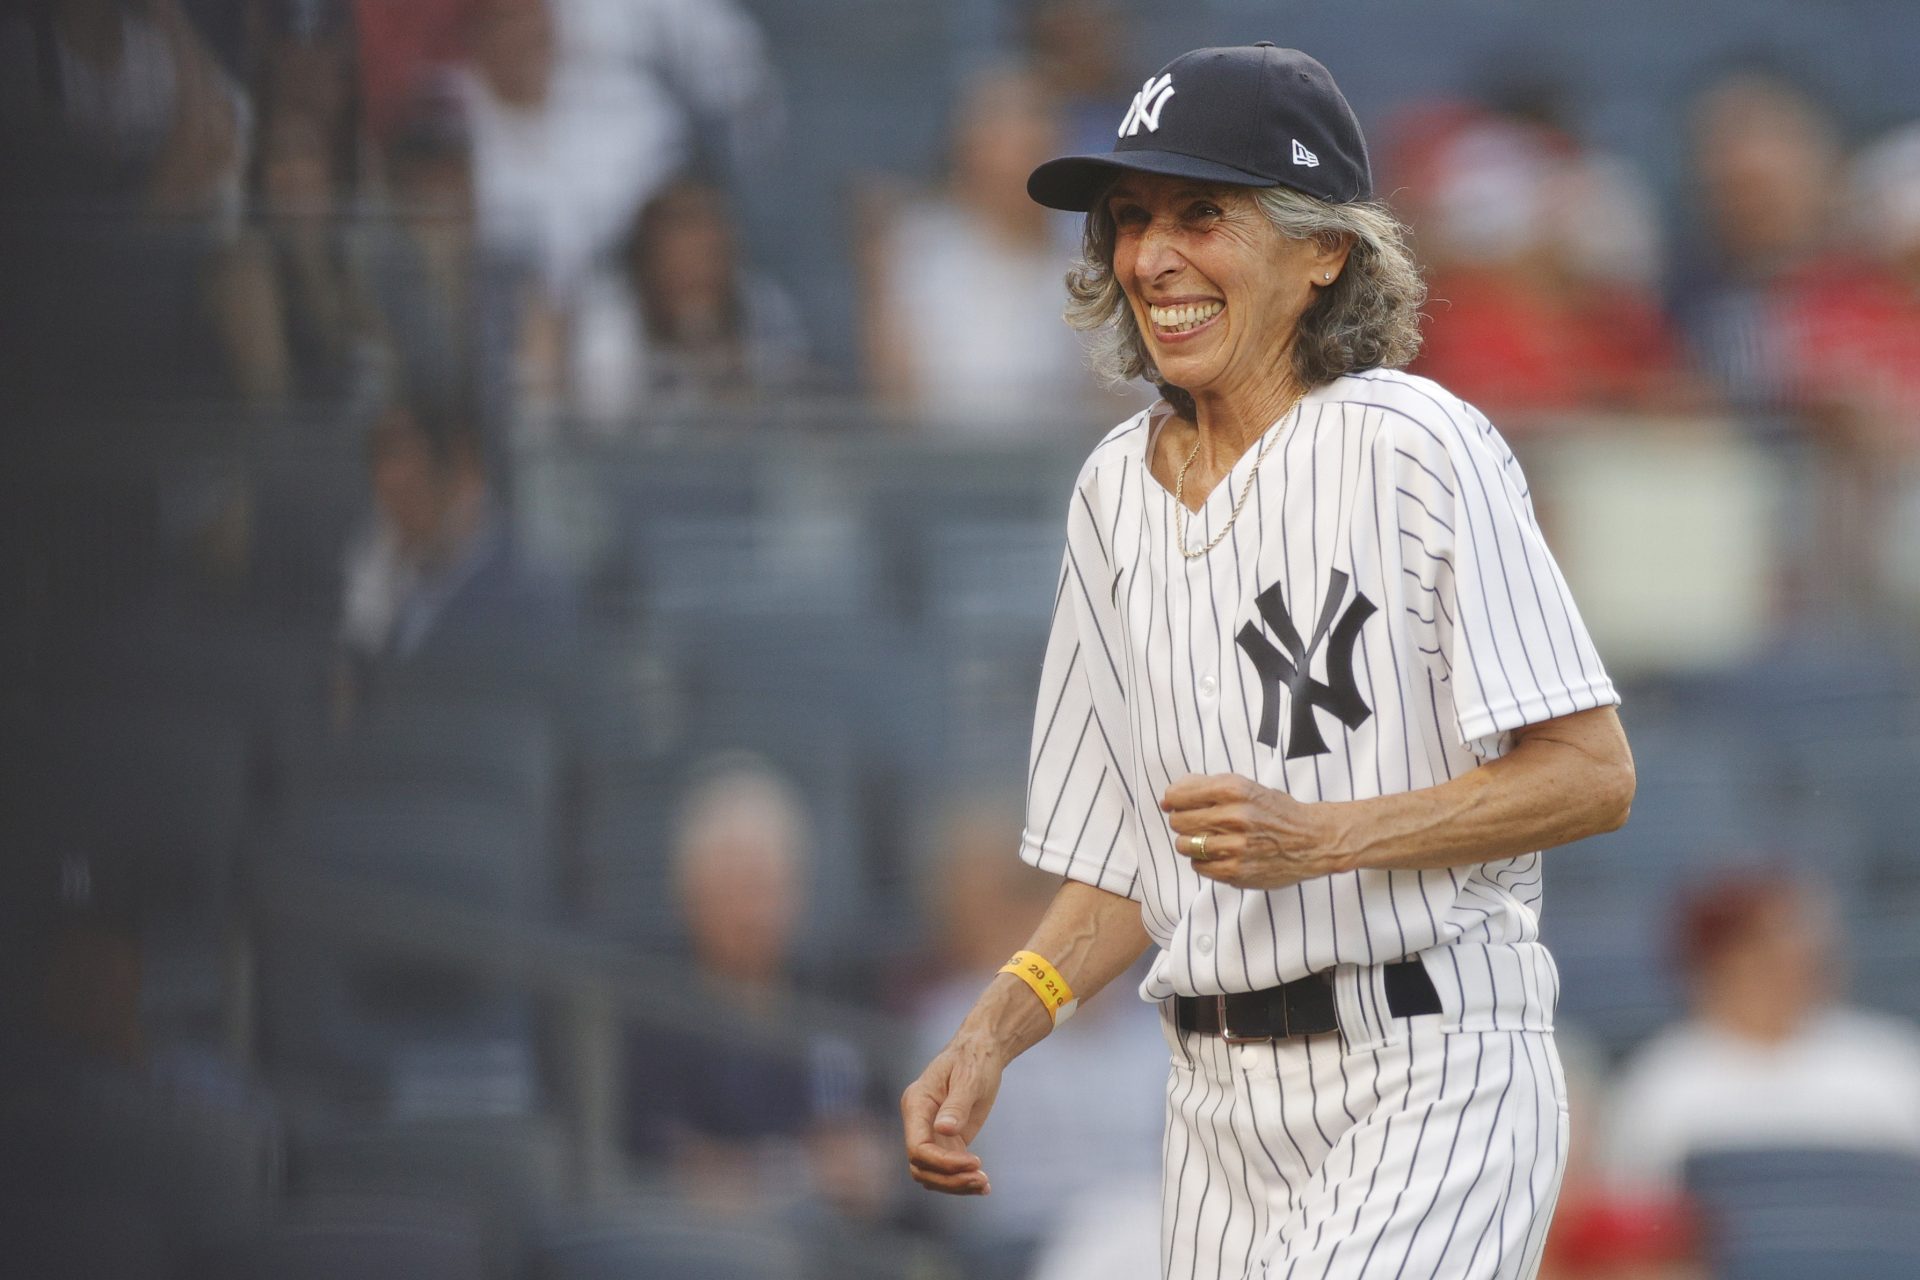 Video: Gwen Goldman Reacts to Magnificent 60-365 days-Outmoded Dream of Being Yankees Bat Girl